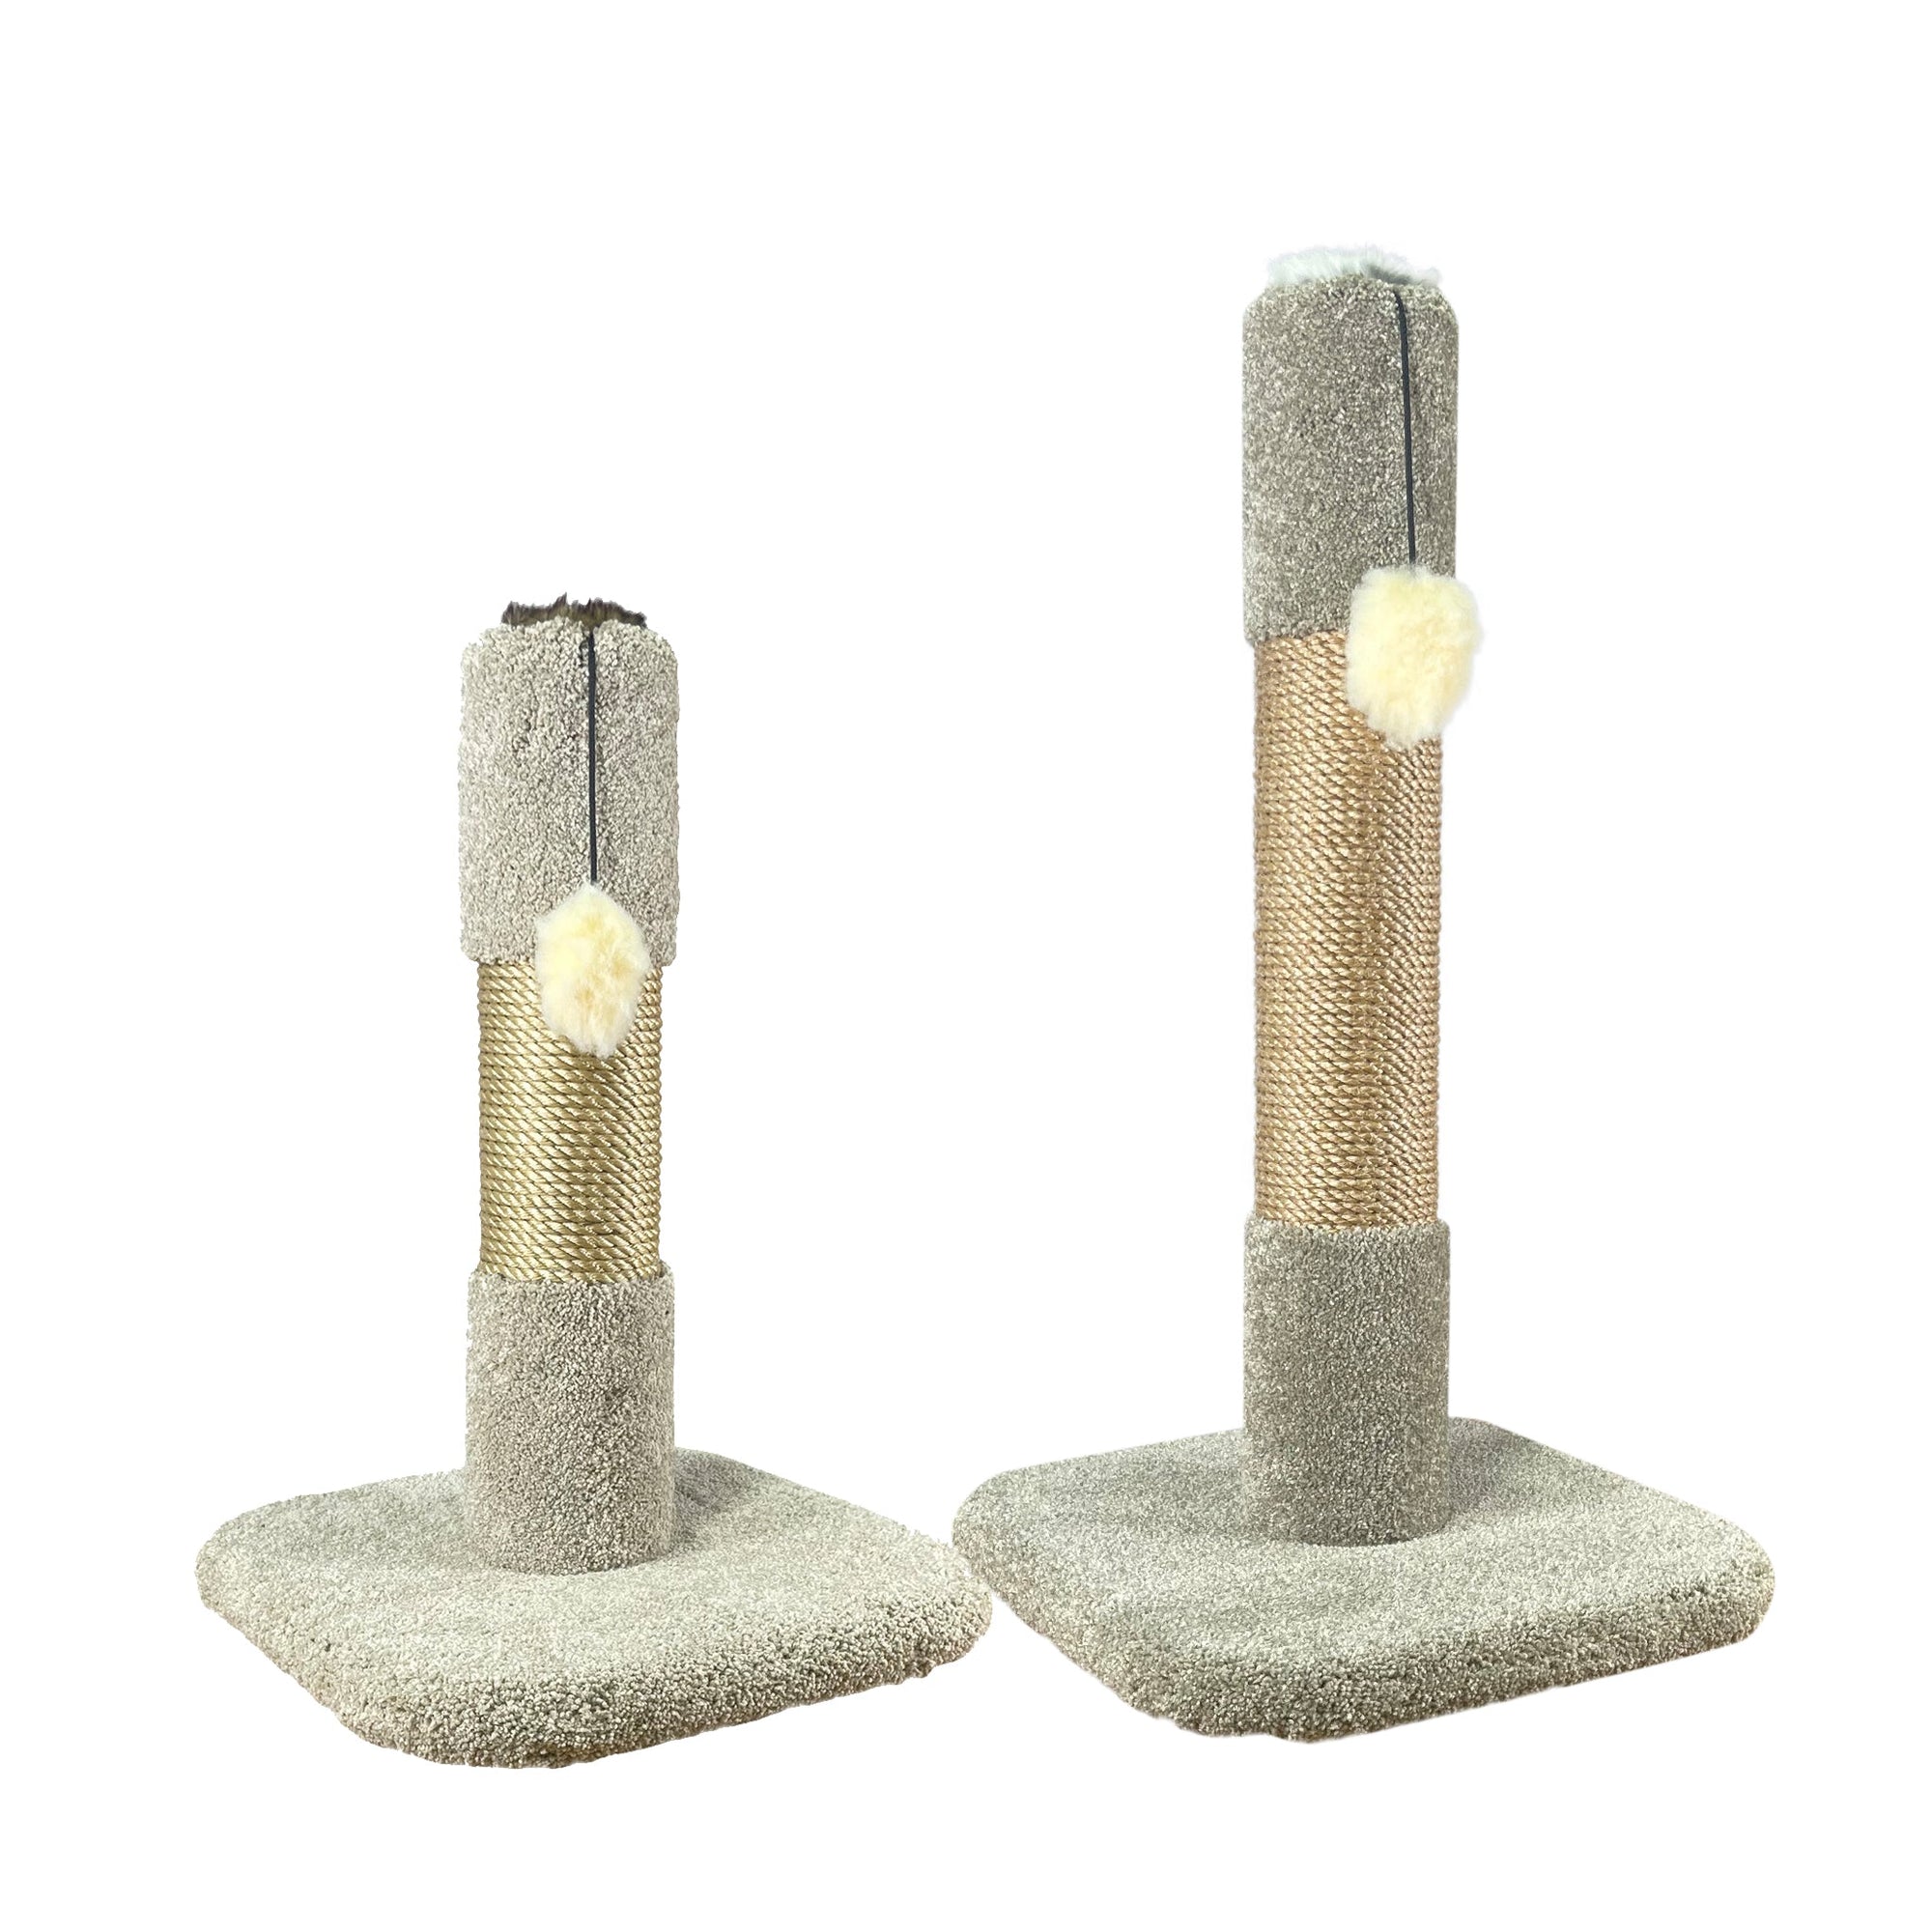 KatAttack Sierra Post Sisal with Square Base - ComfyPet Products